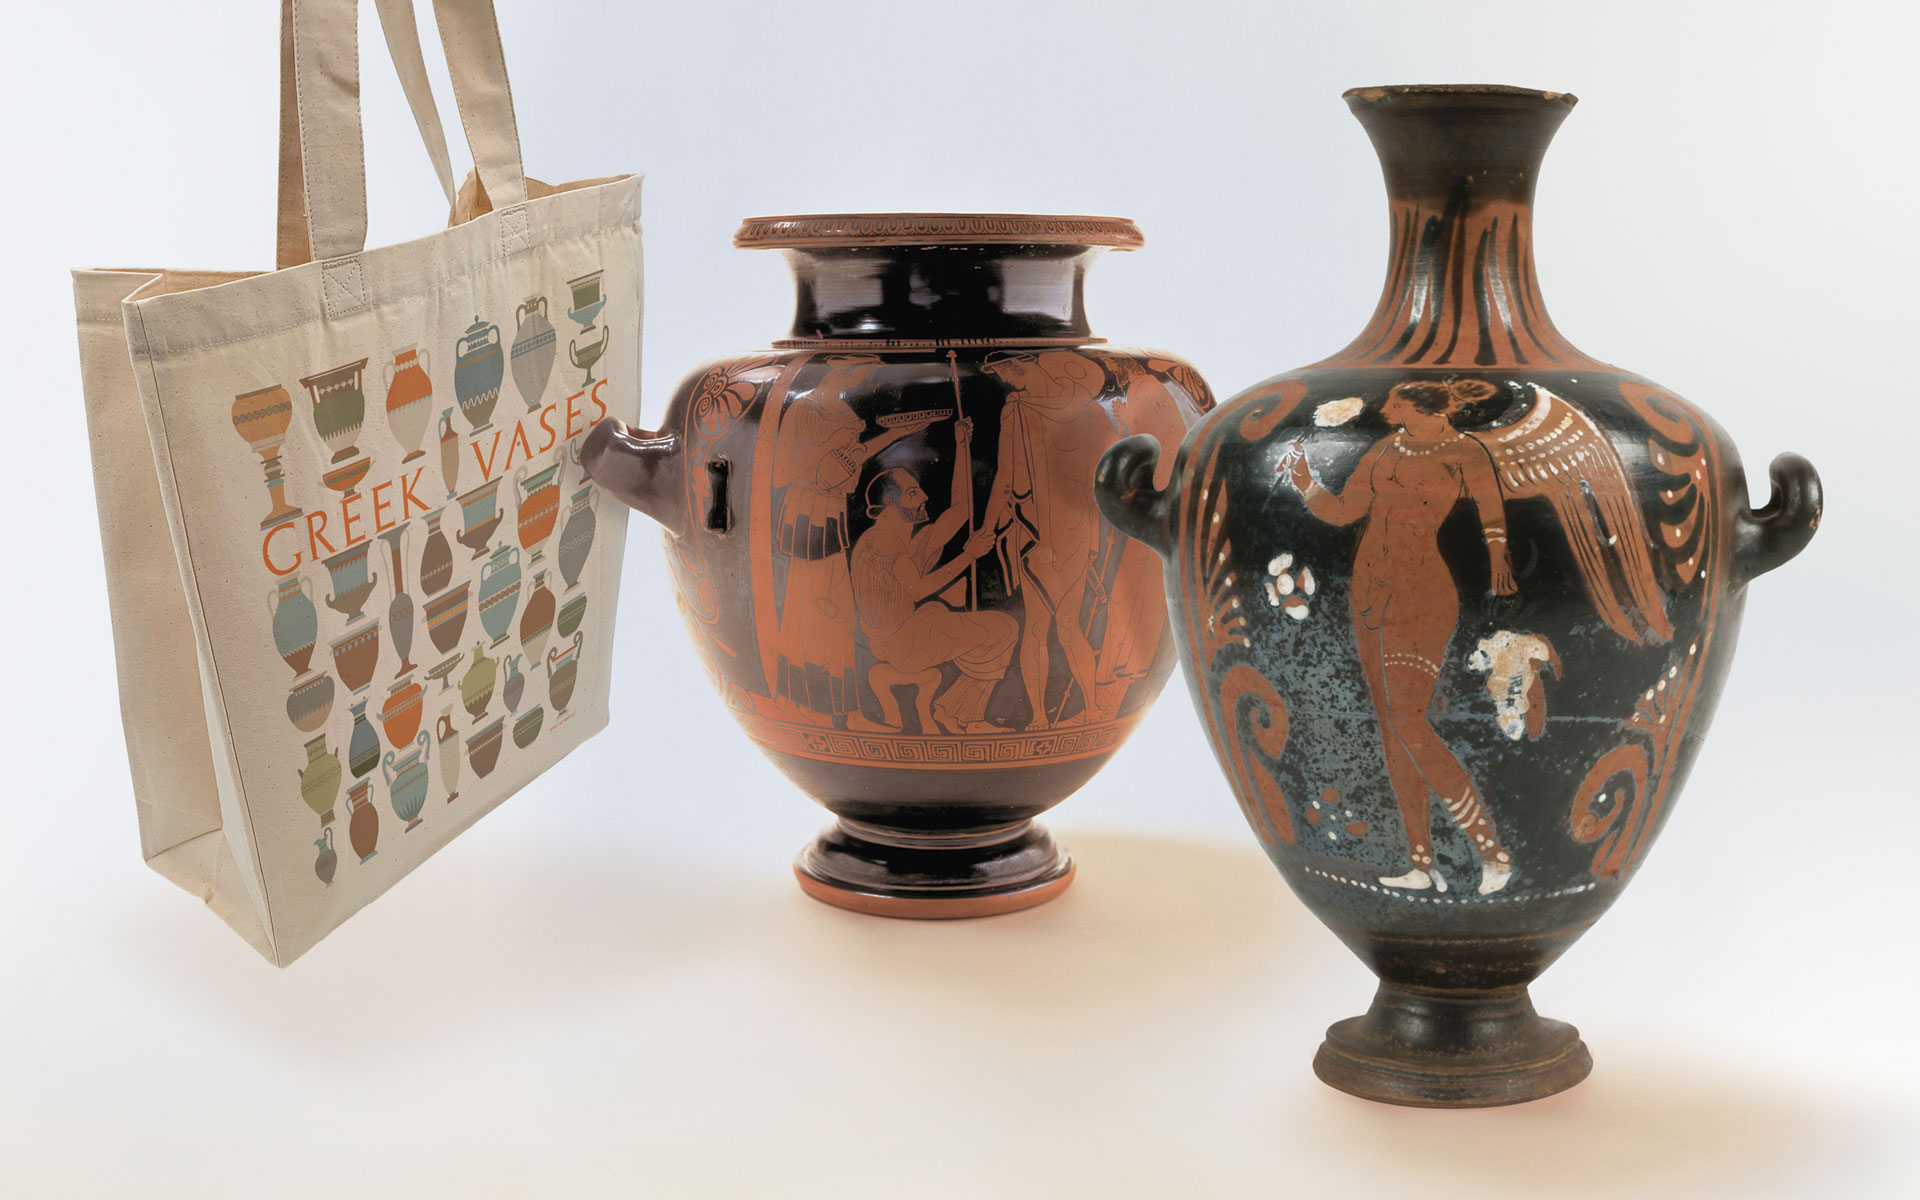 Ancient Greek vases and themed tote bag.